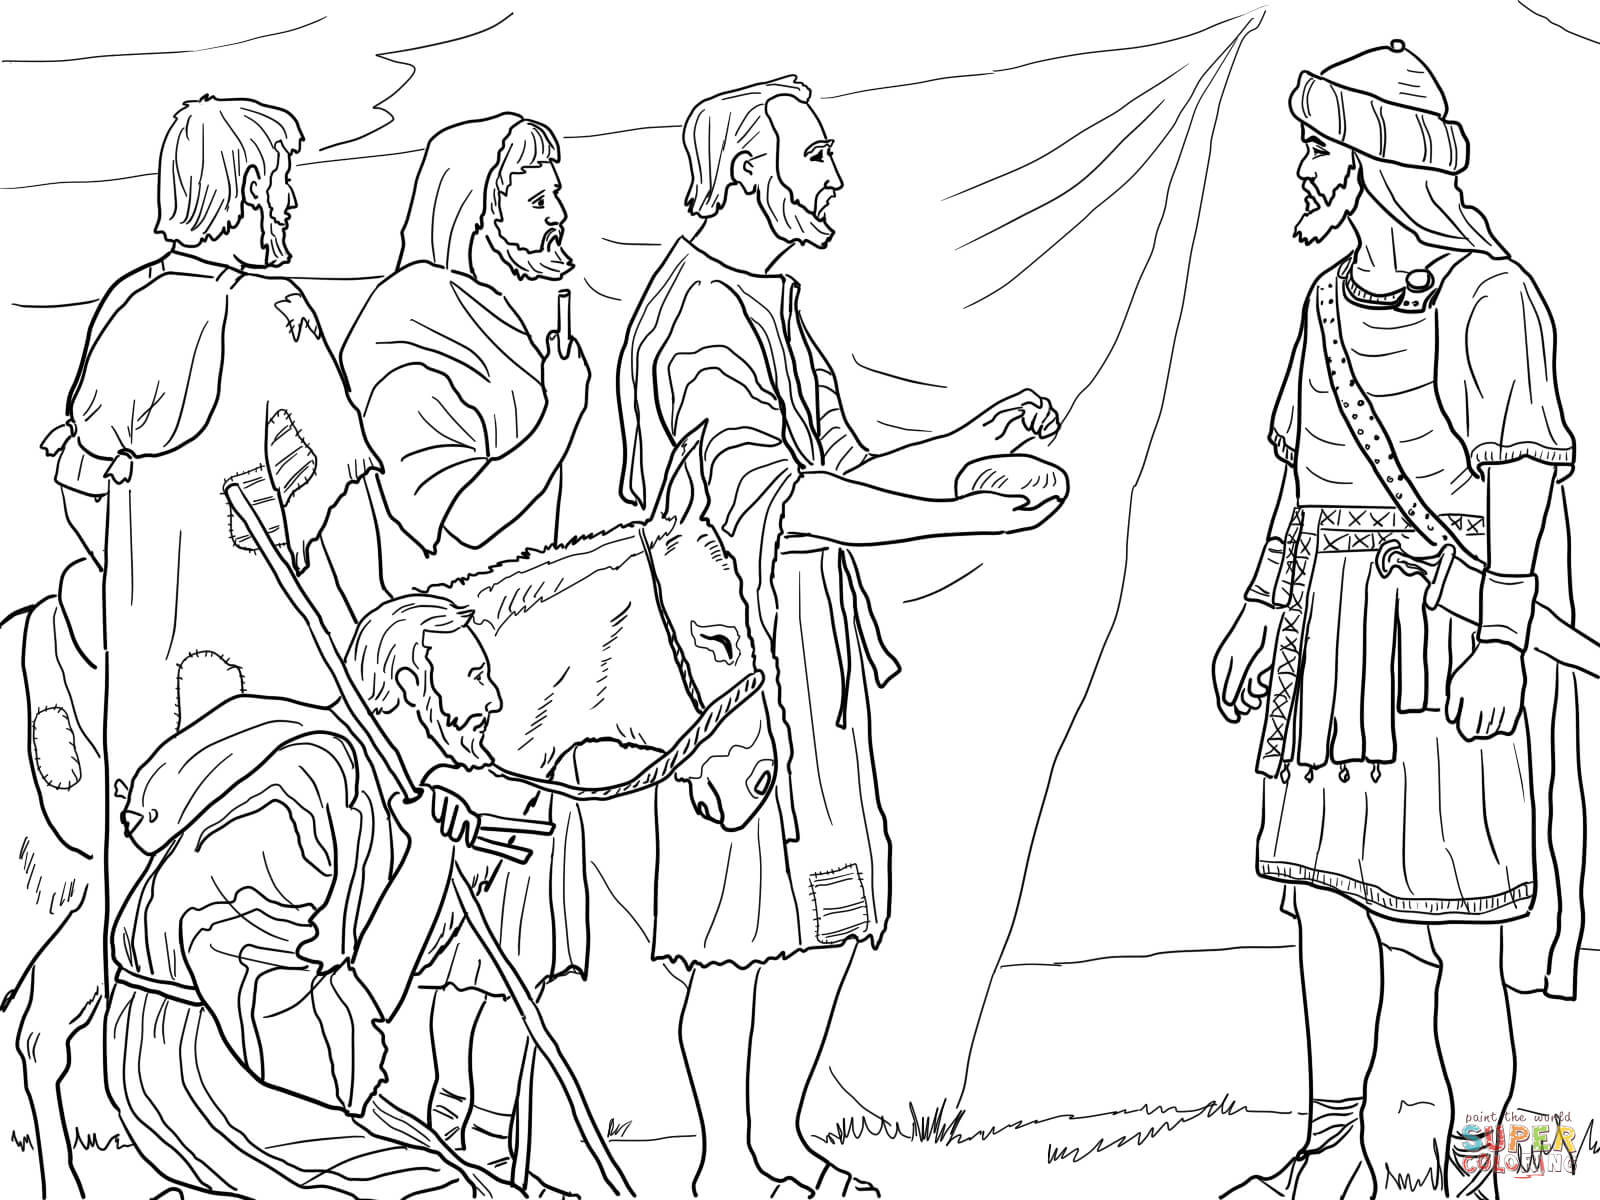 Crossing The Jordan River Coloring Pages | Free Coloring Pages on ...